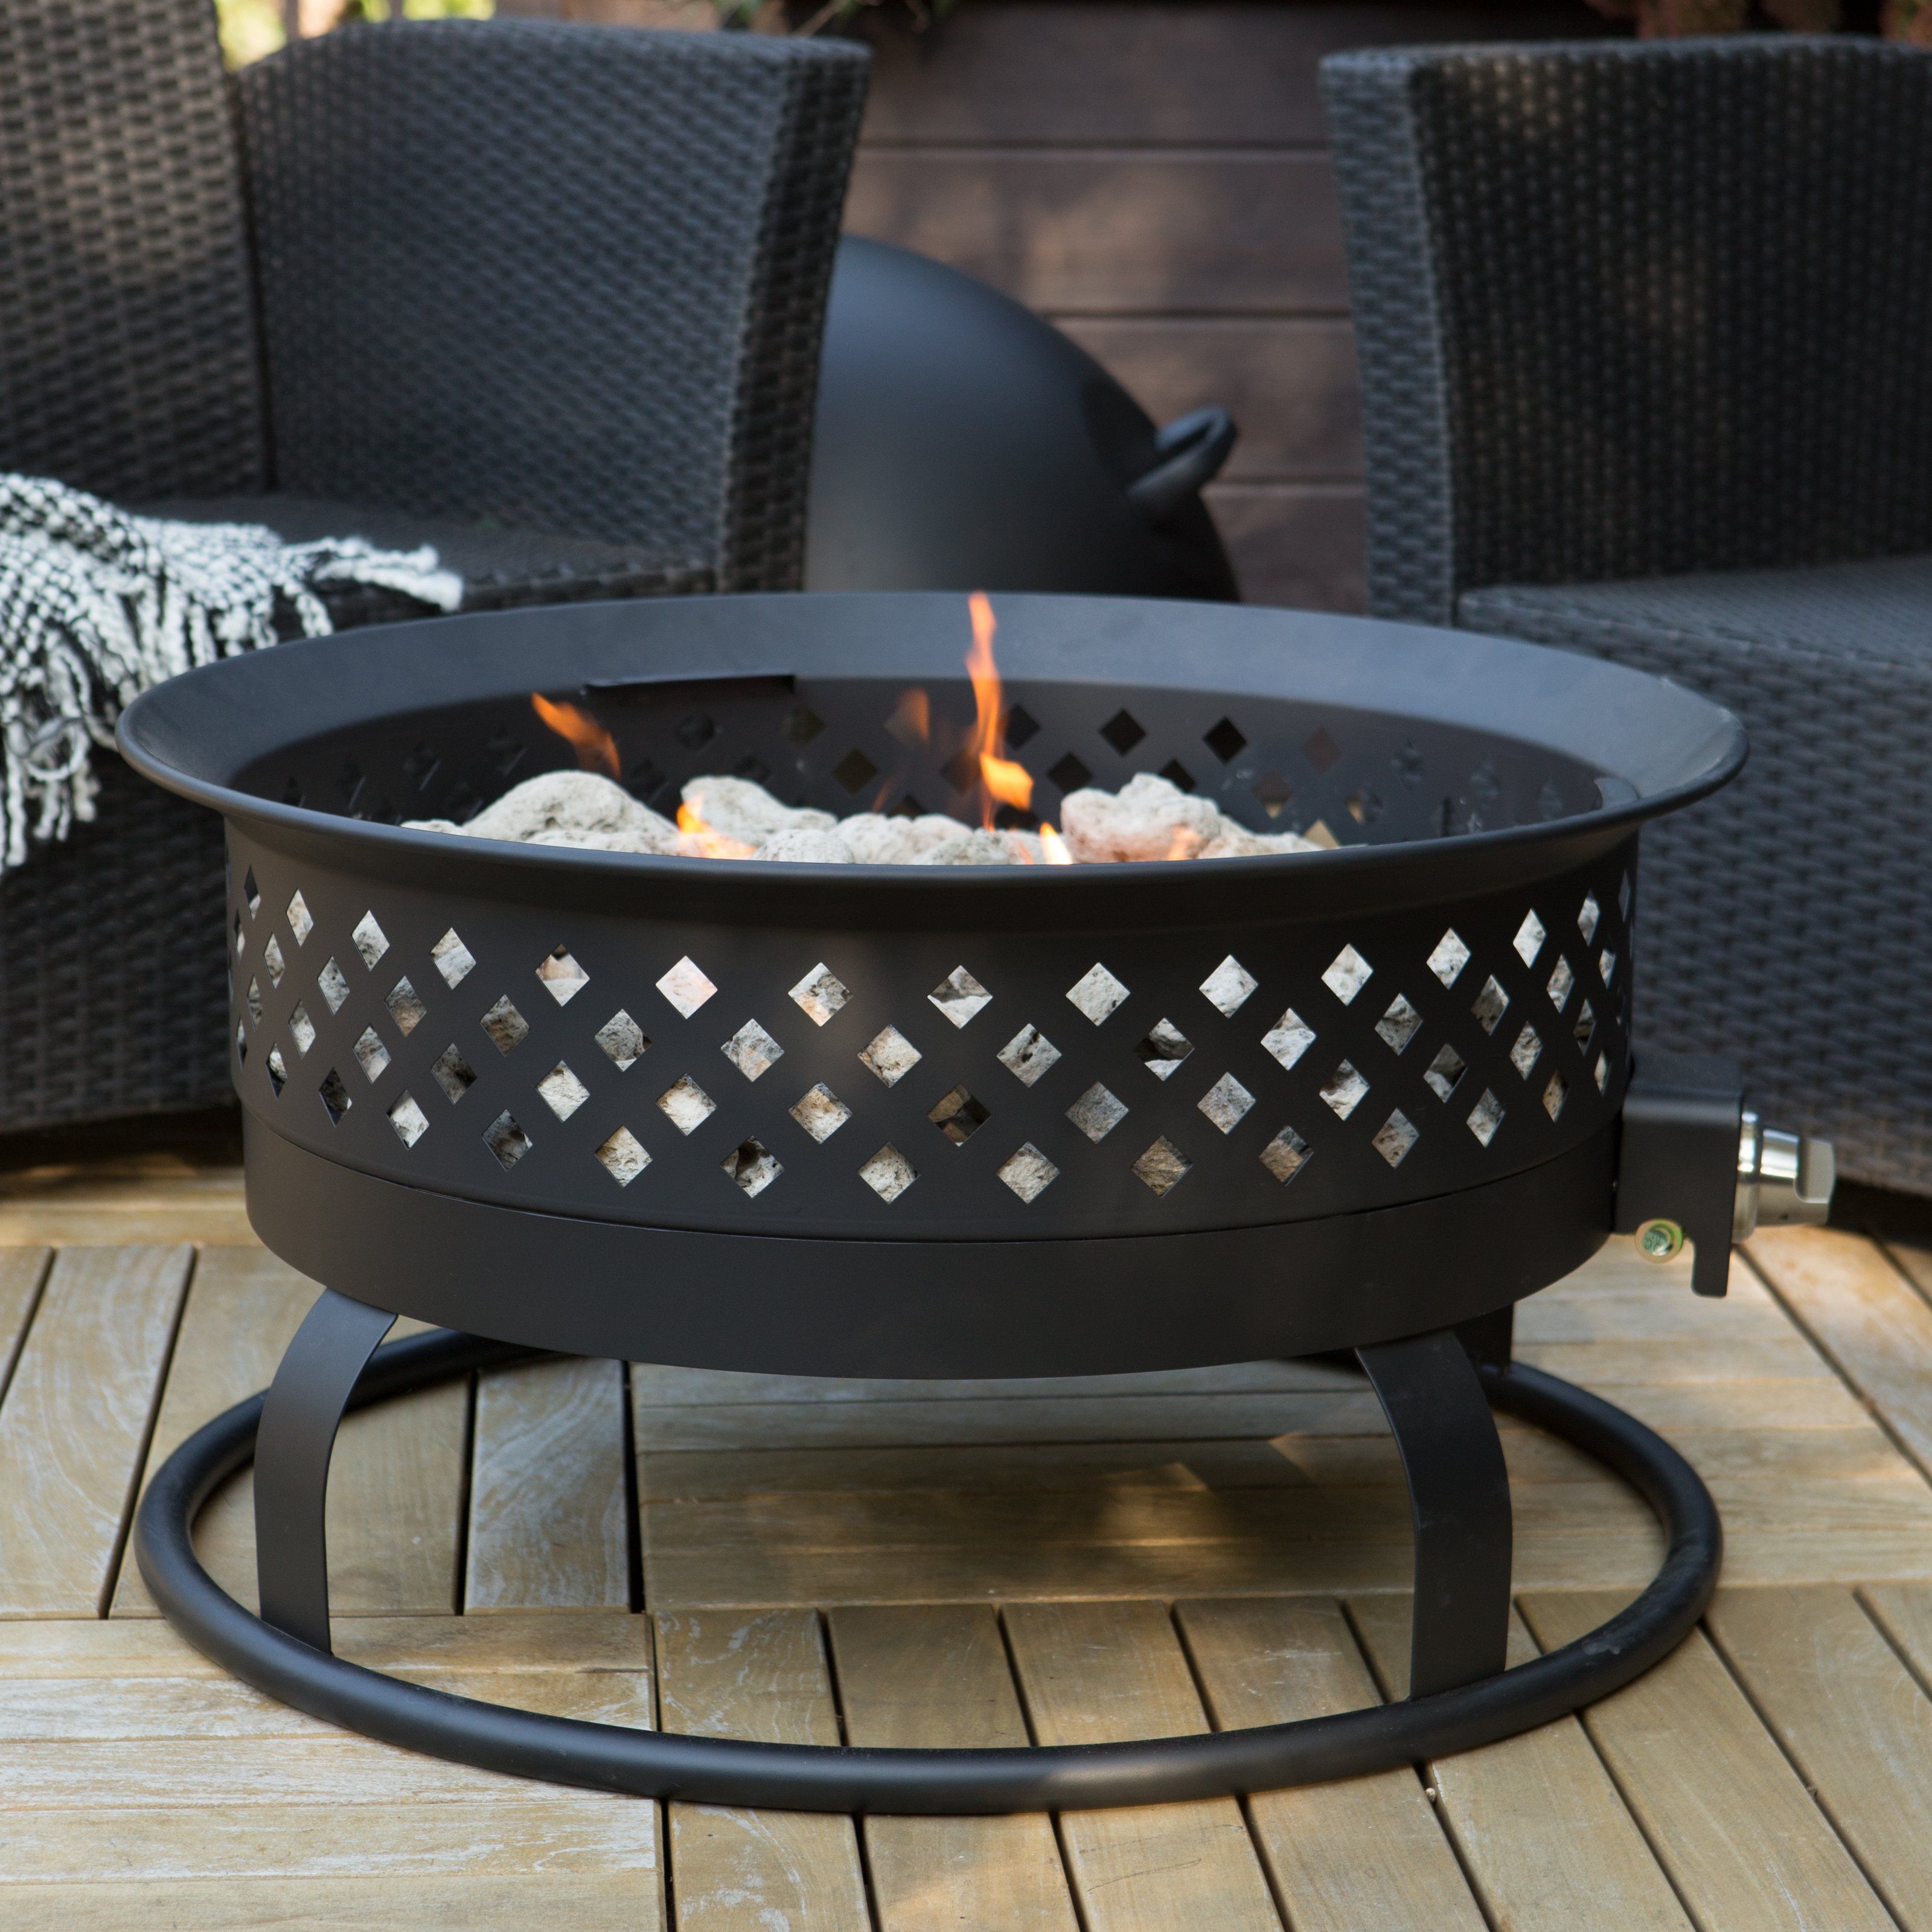 Portable Propane Fireplace New Have to Have It Bond 28 In Round Bronze Propane 55k Btu